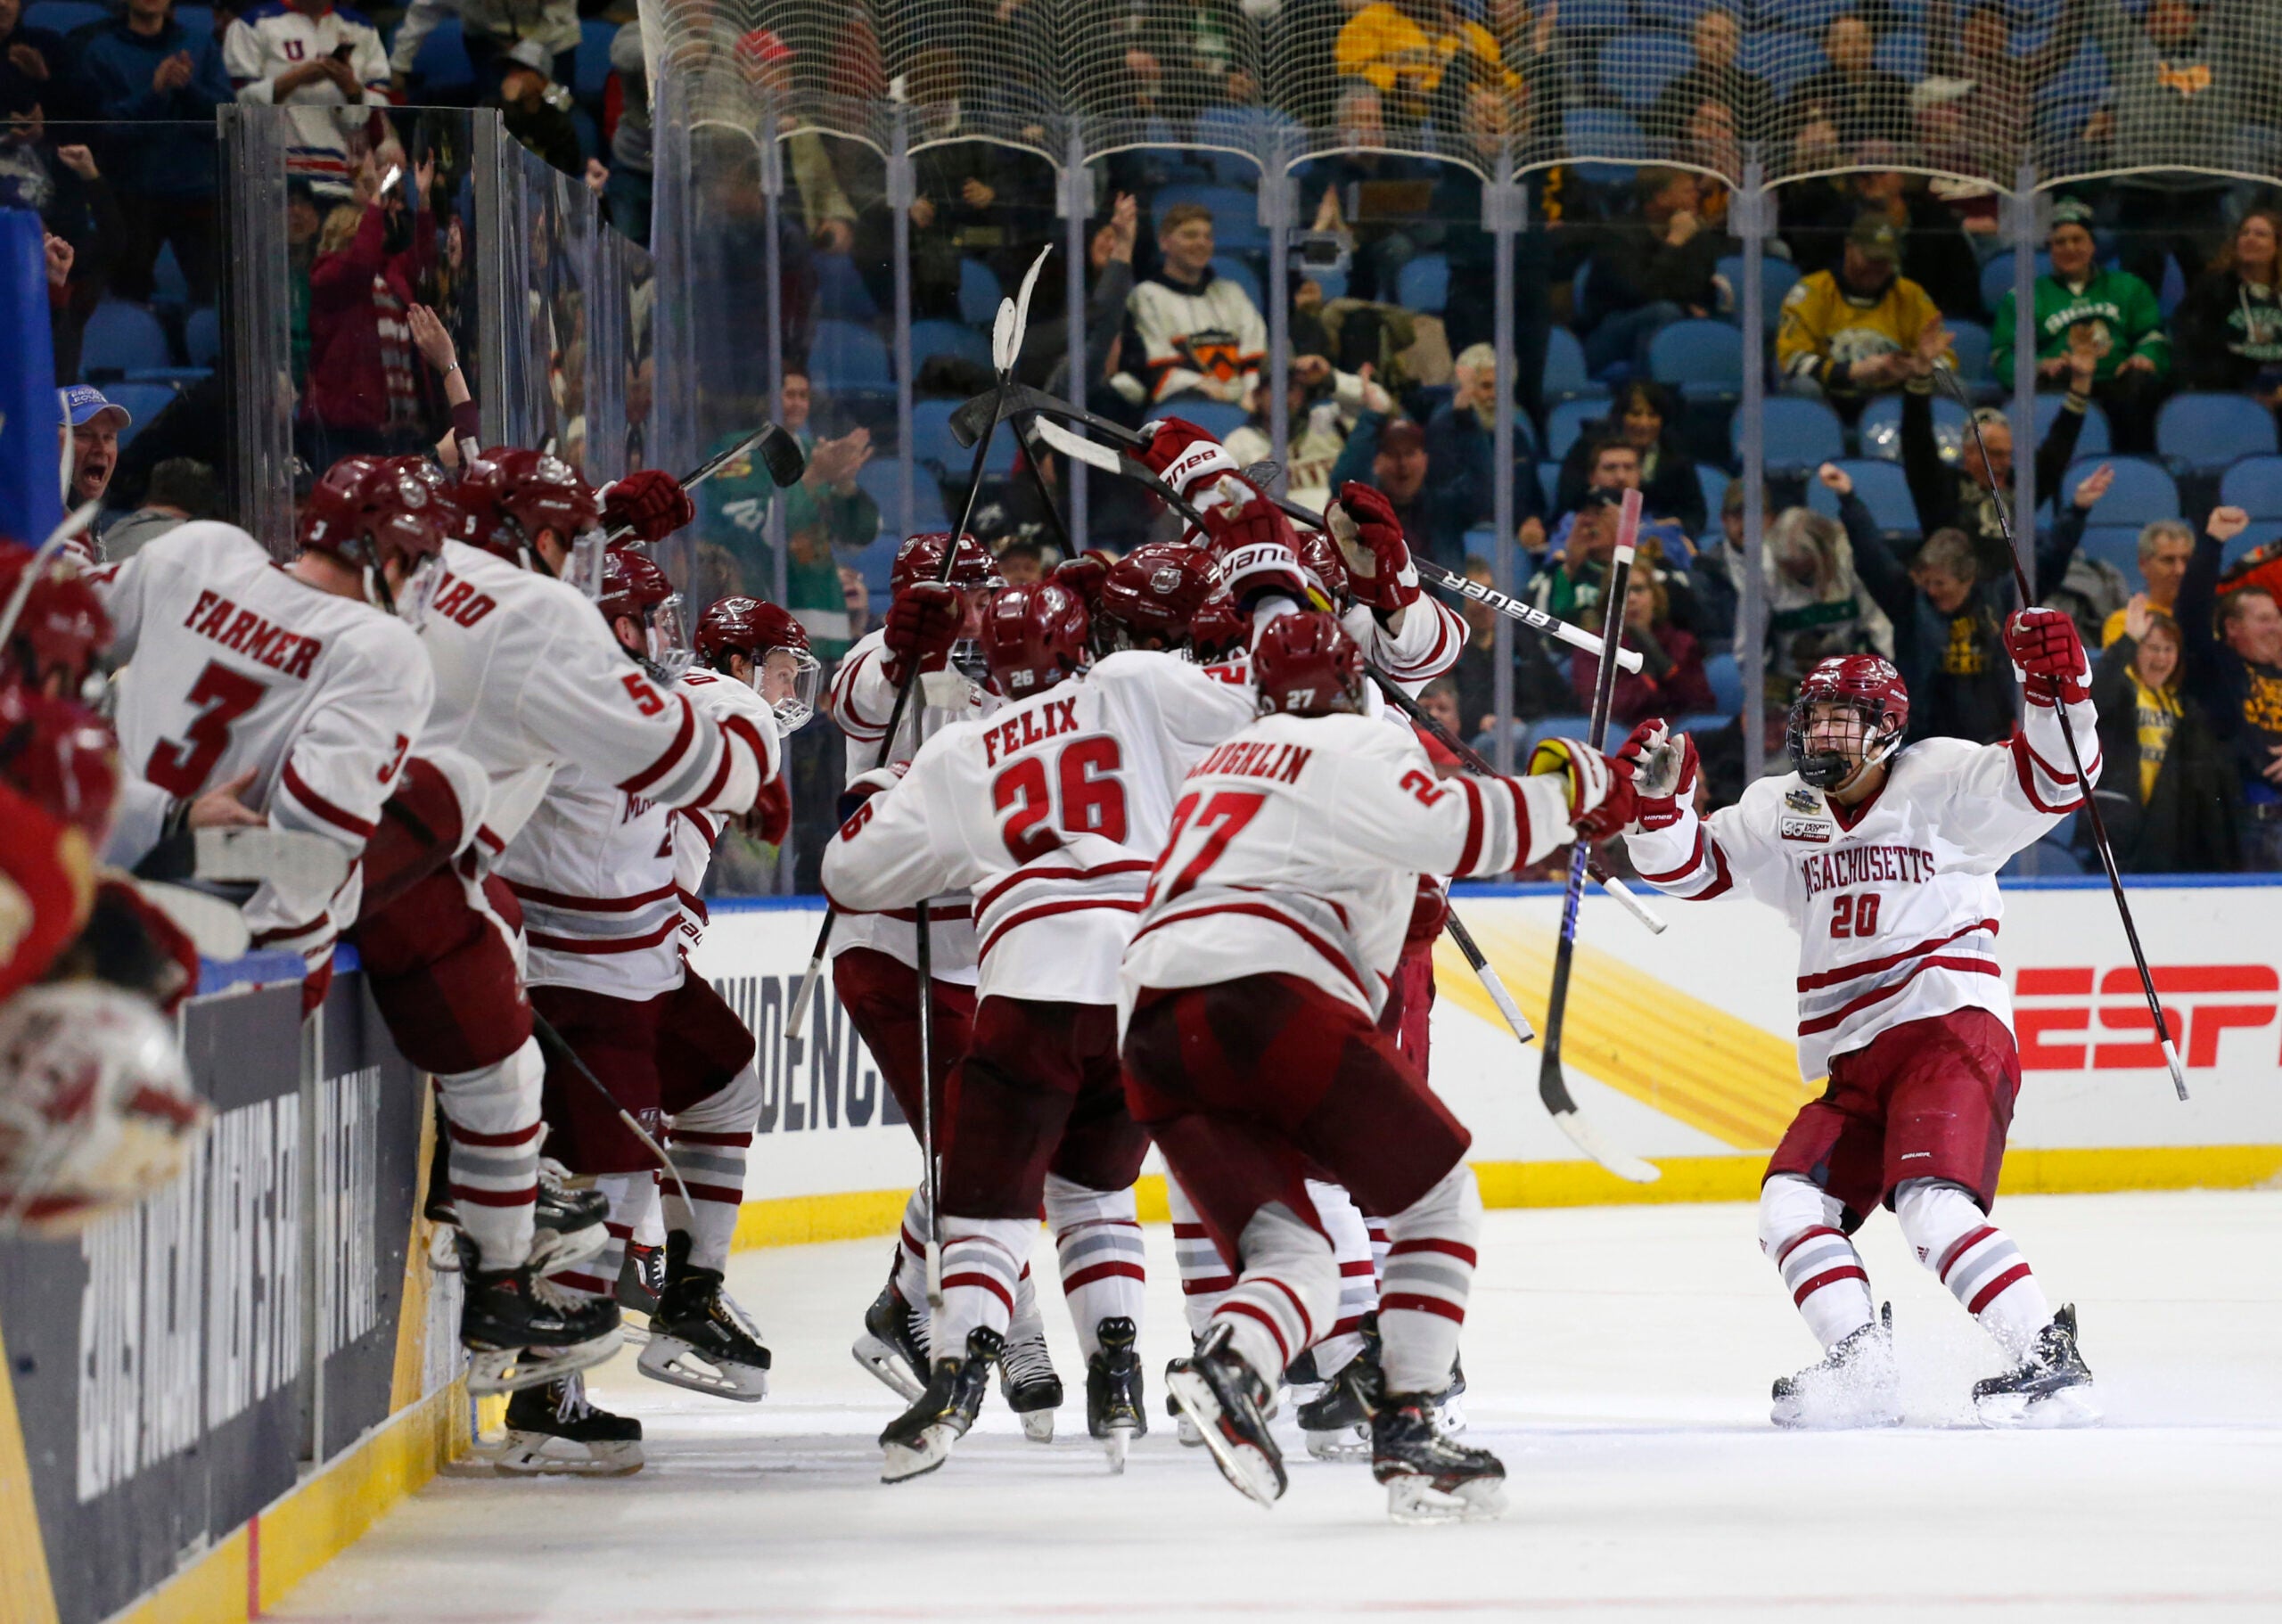 UMass hockey coach Greg Carvel shared a personal anecdote ahead of the NCAA  title game